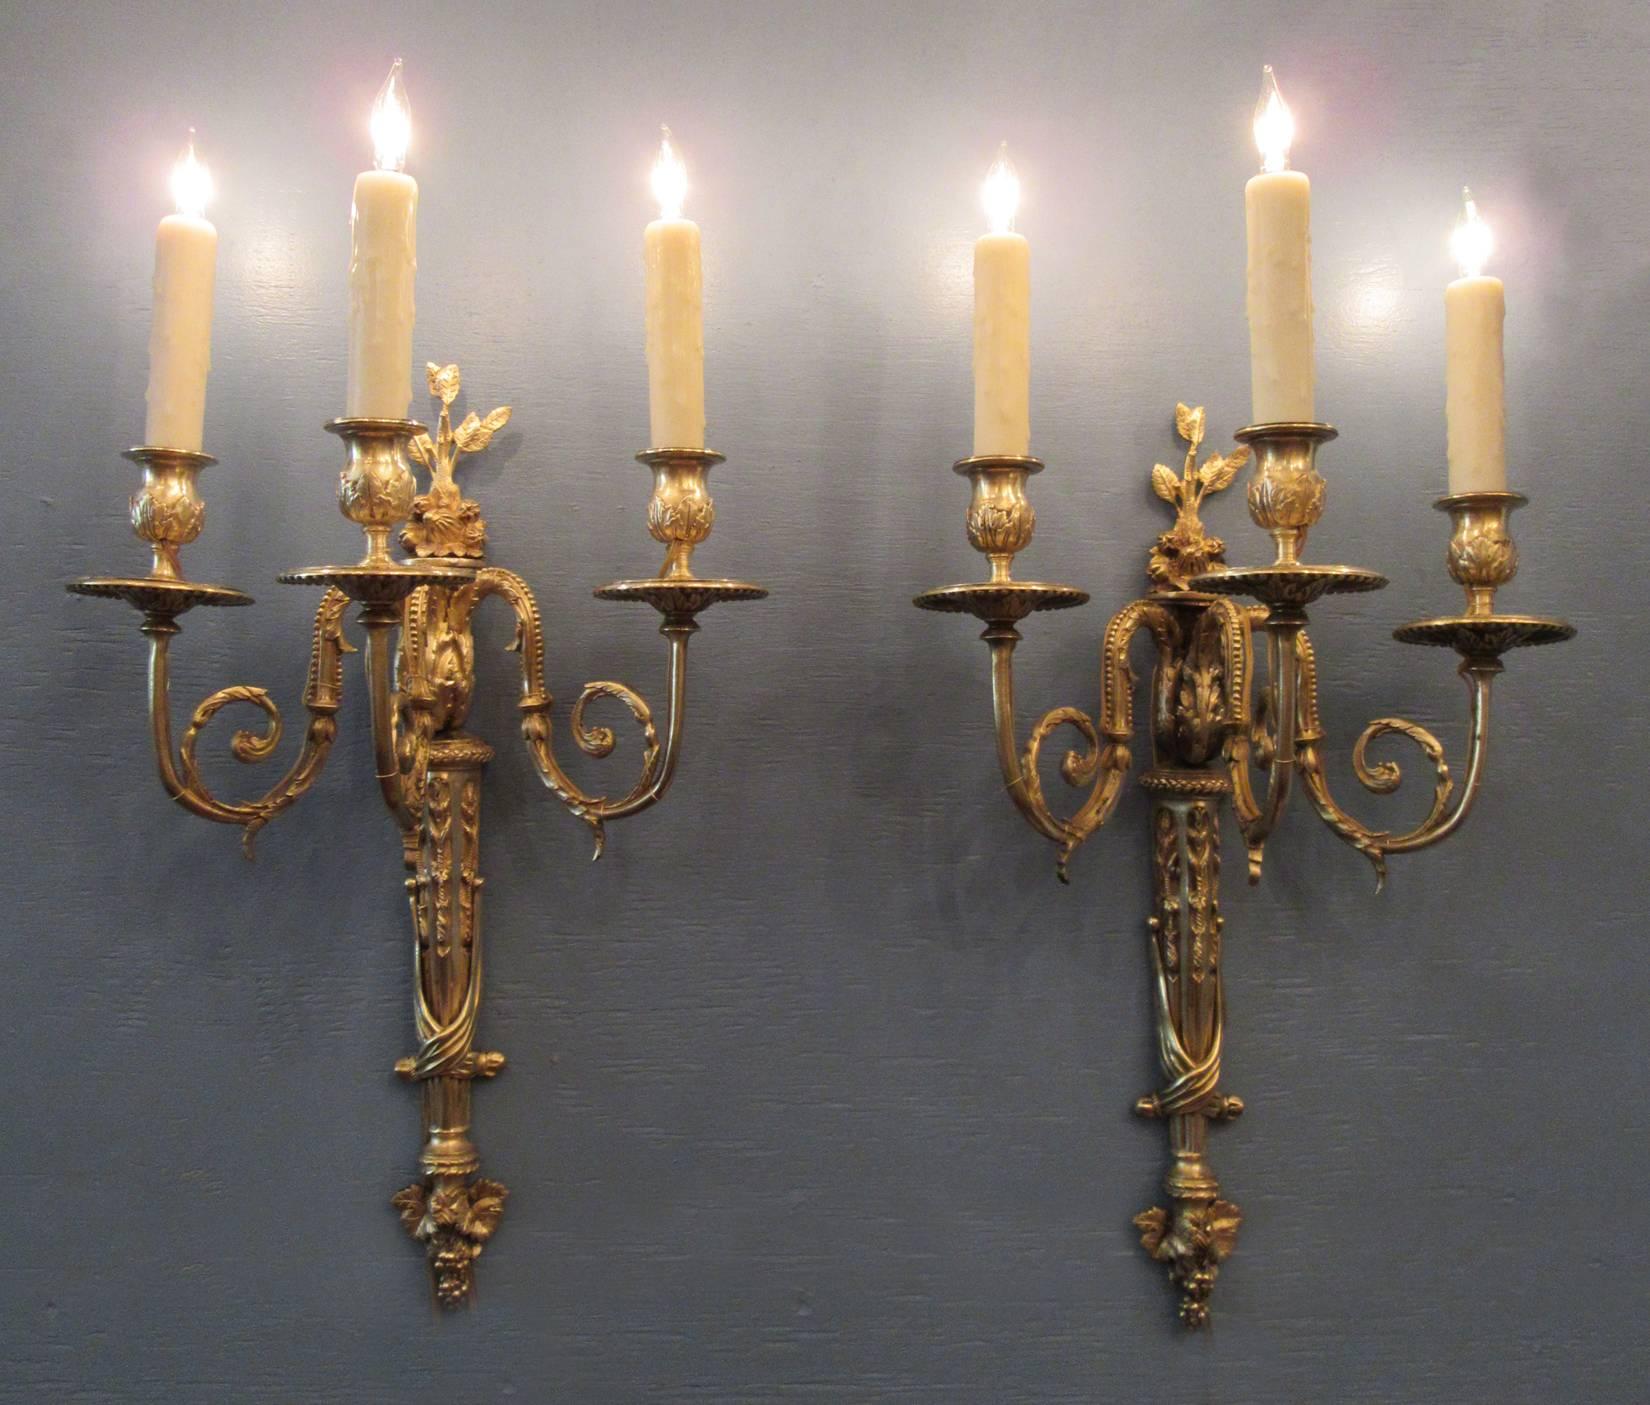 A pair of early 19th century French Regence bronze doré sconces, circa 1810, each featuring three candle arm torchieres with foliate, grape and fruit motifs. The pair were originally candle but have been recently cleaned and rewired with new